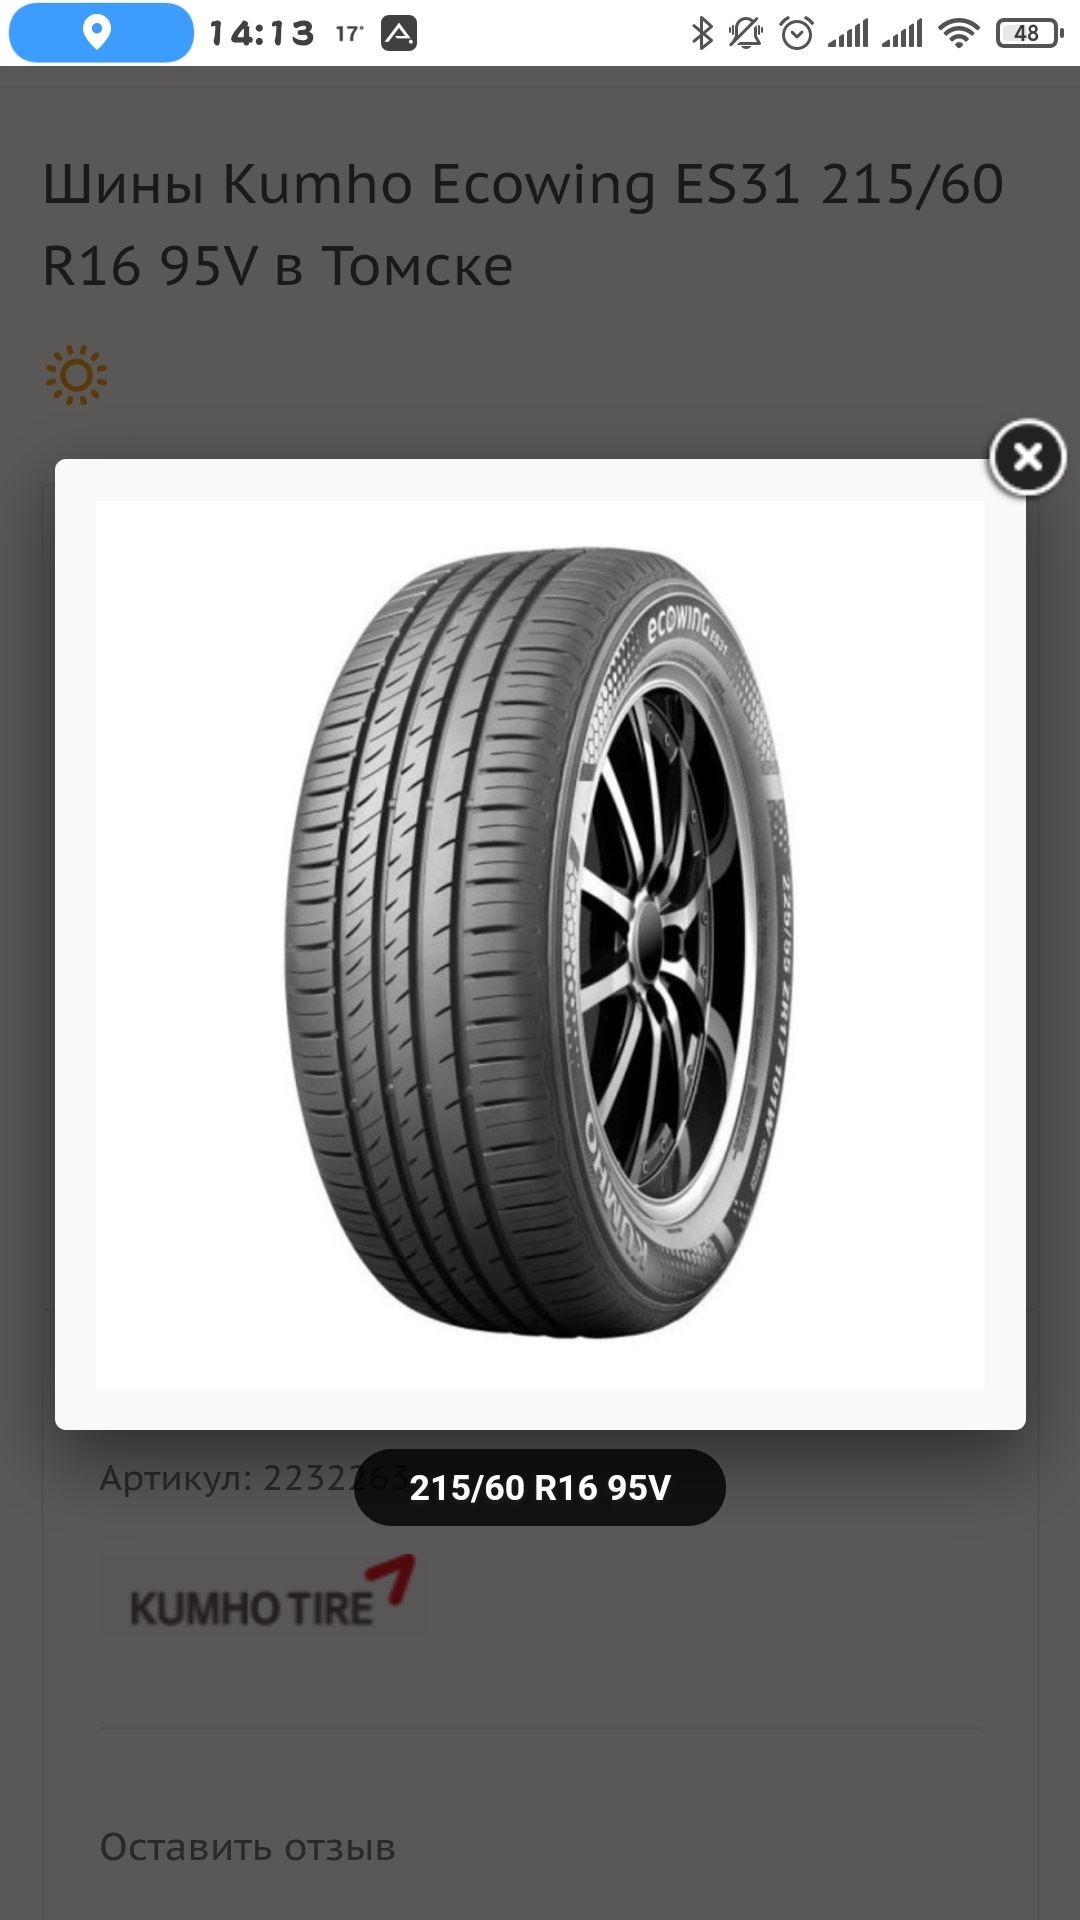 Kumho ecowing es31 195 65 r15 91h